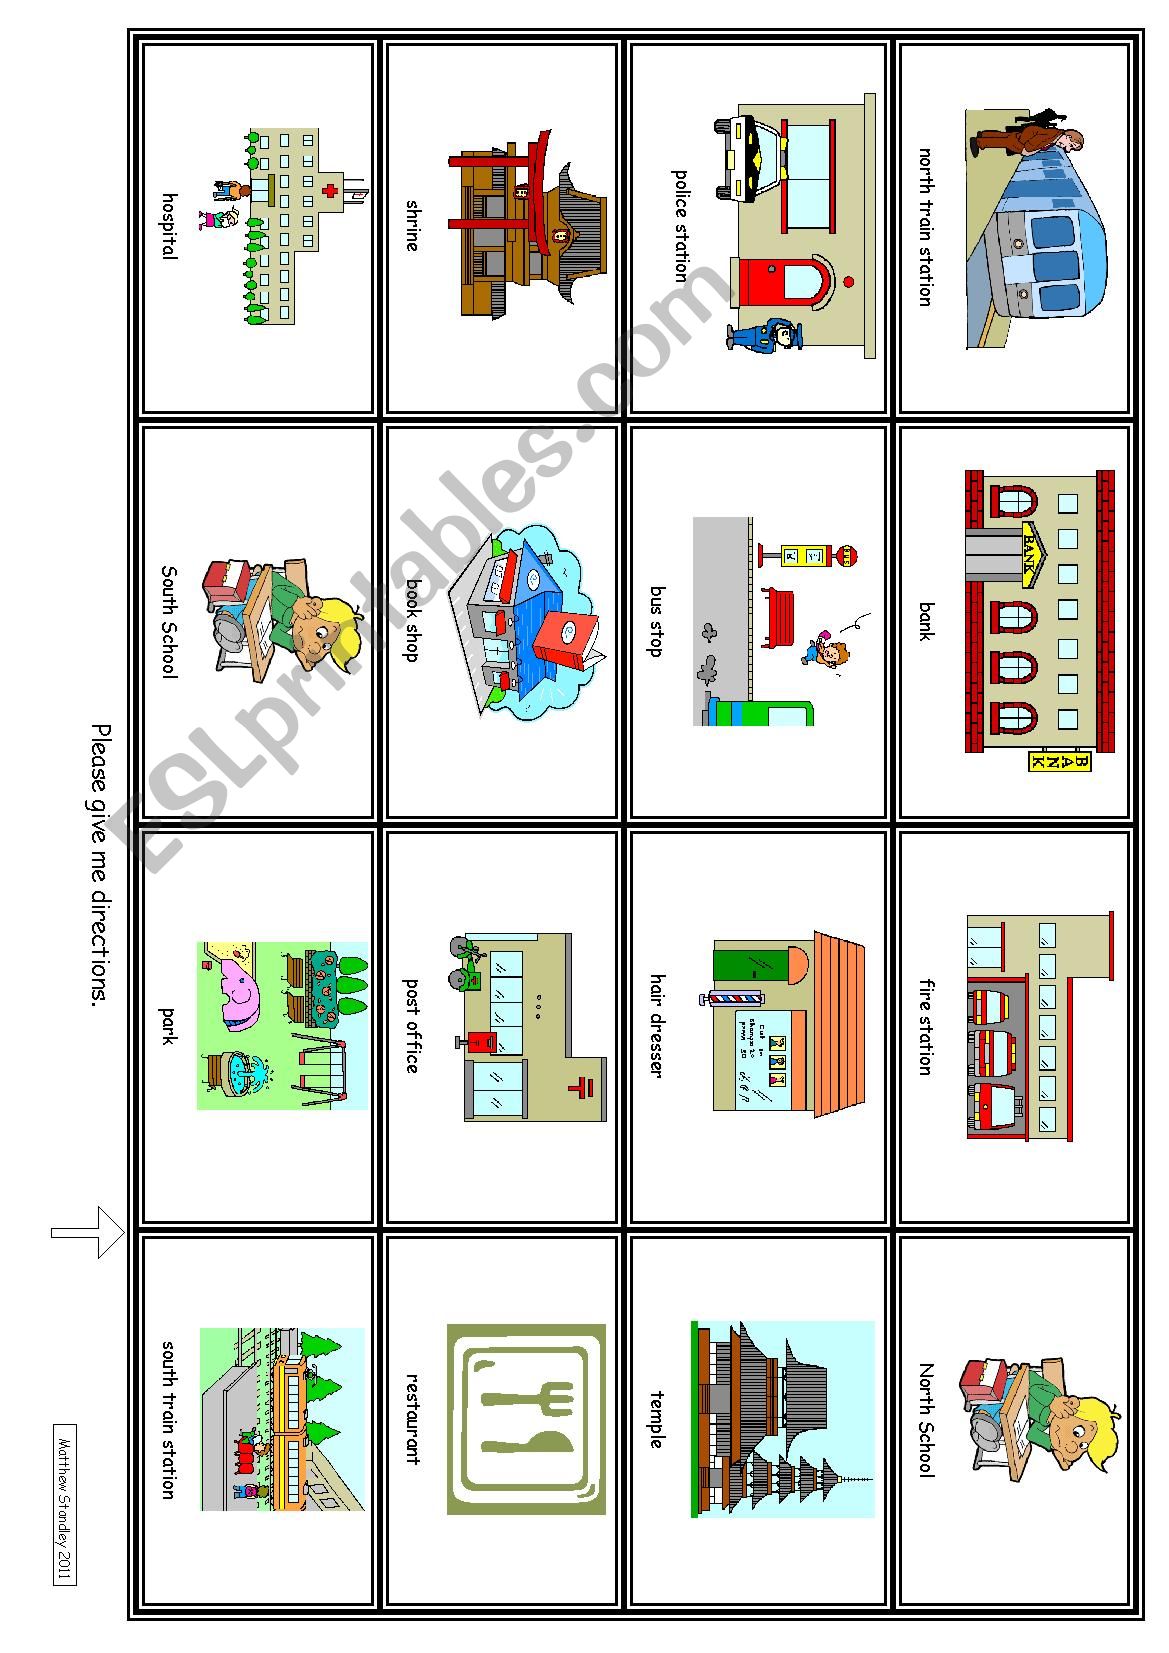 DIRECTIONS - Conversations and maps - Beginner and young learners (streets) 1